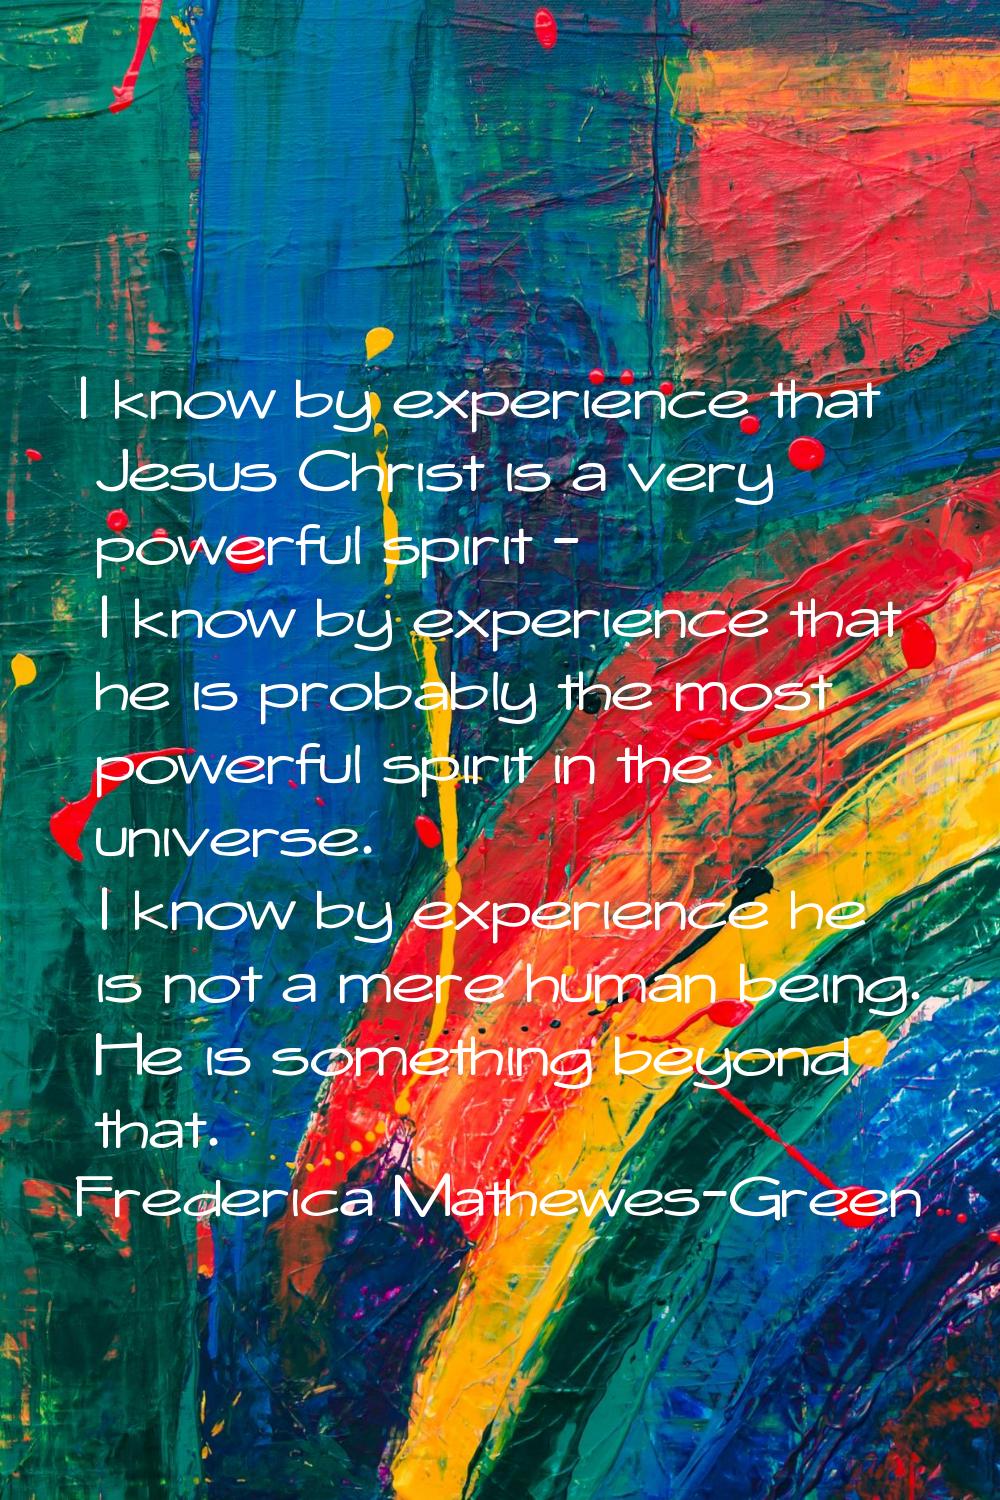 I know by experience that Jesus Christ is a very powerful spirit - I know by experience that he is 